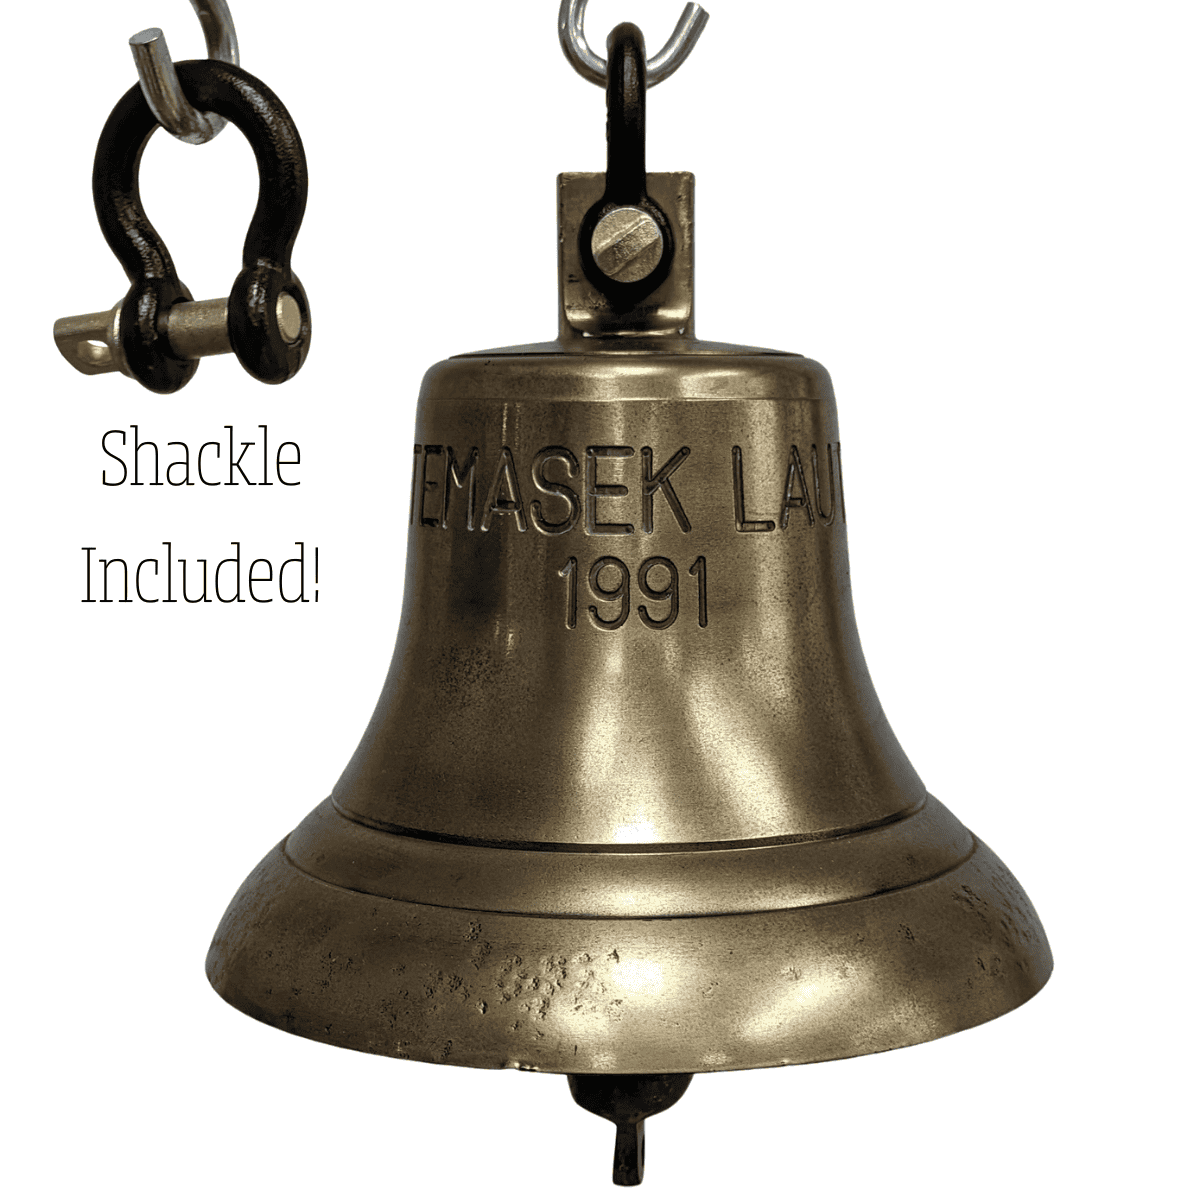 Brass Ship's Bell Offshore Tugboat Bell Temasek Laut 1991 with Shackle